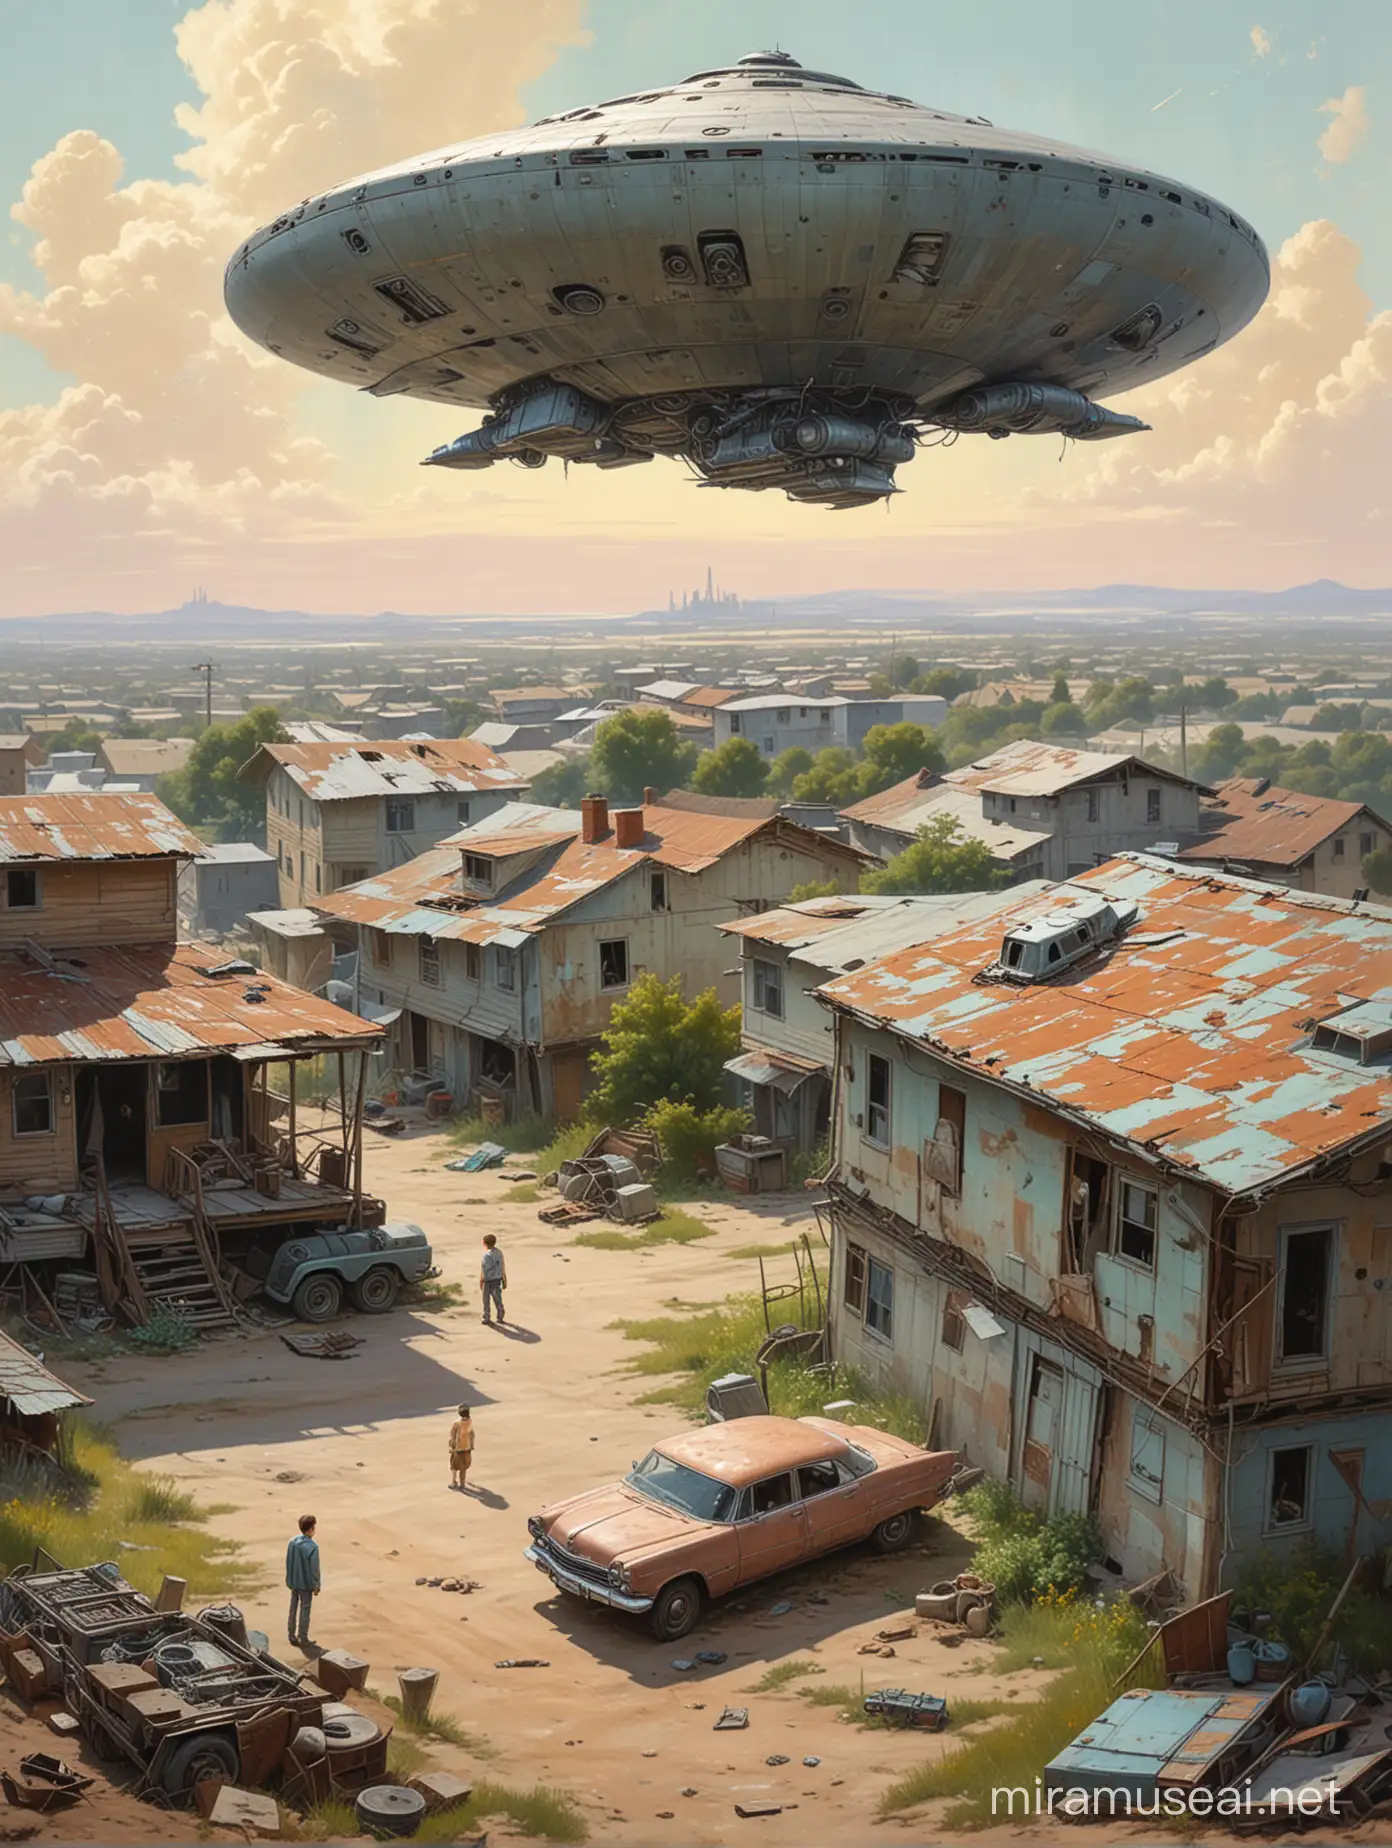 Highly detailed painting based on 'The Sentinel' by Ed F. Howard, wide view from above, a boy sits on the roof of a derelict car looking at a colossal flying saucer, a metal robot stands guard in the distance, use muted pastel colors only, high quality

